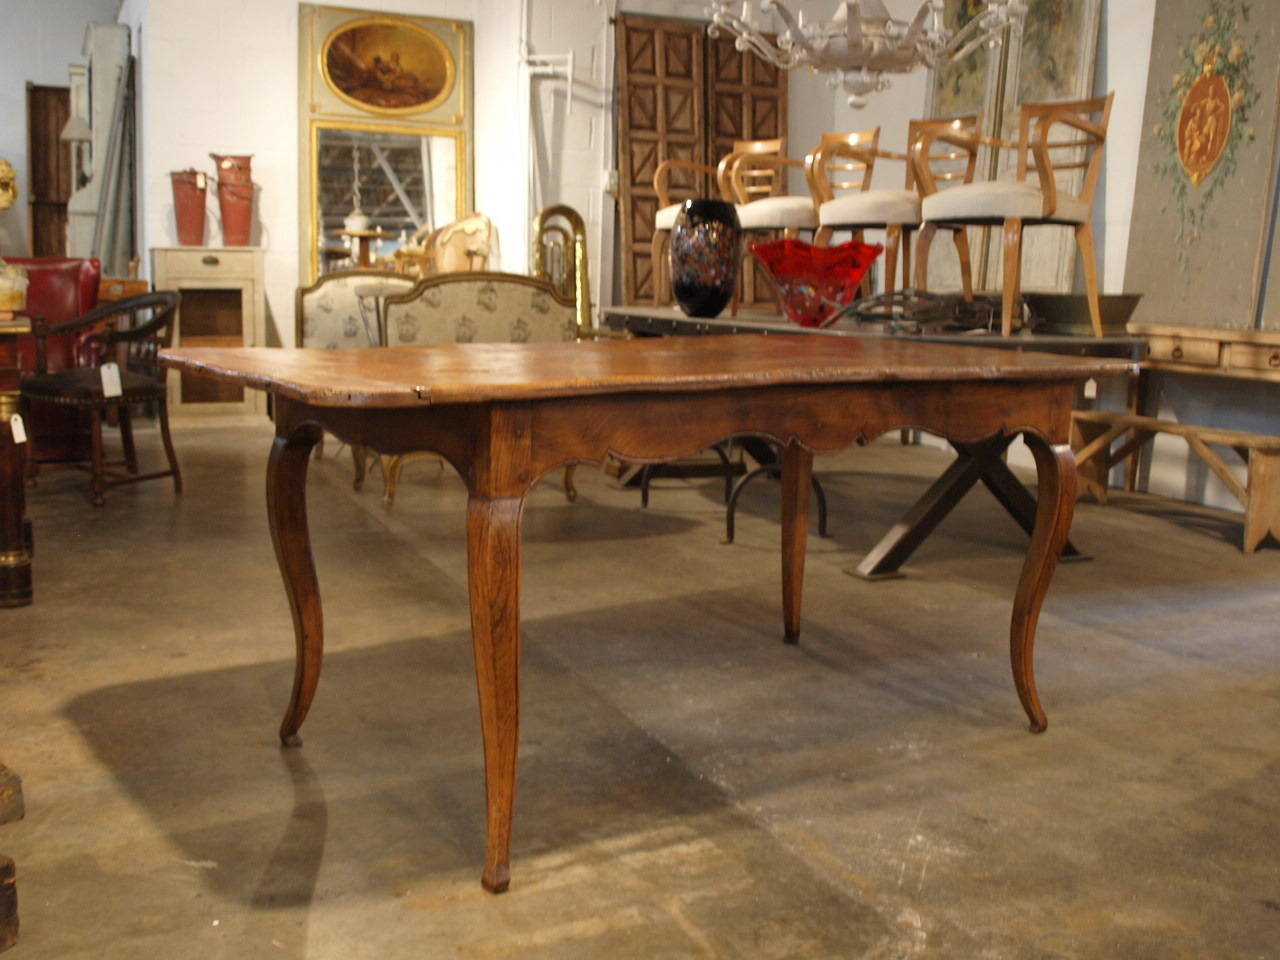 18th Century French Provencal Dining Table in chestnut from the Saint Remy De Provenance area.  This very lovely table is full of character and charm.  The patina is deep and very luminous - with wonderful grain patterns.  The beautifully sculpted